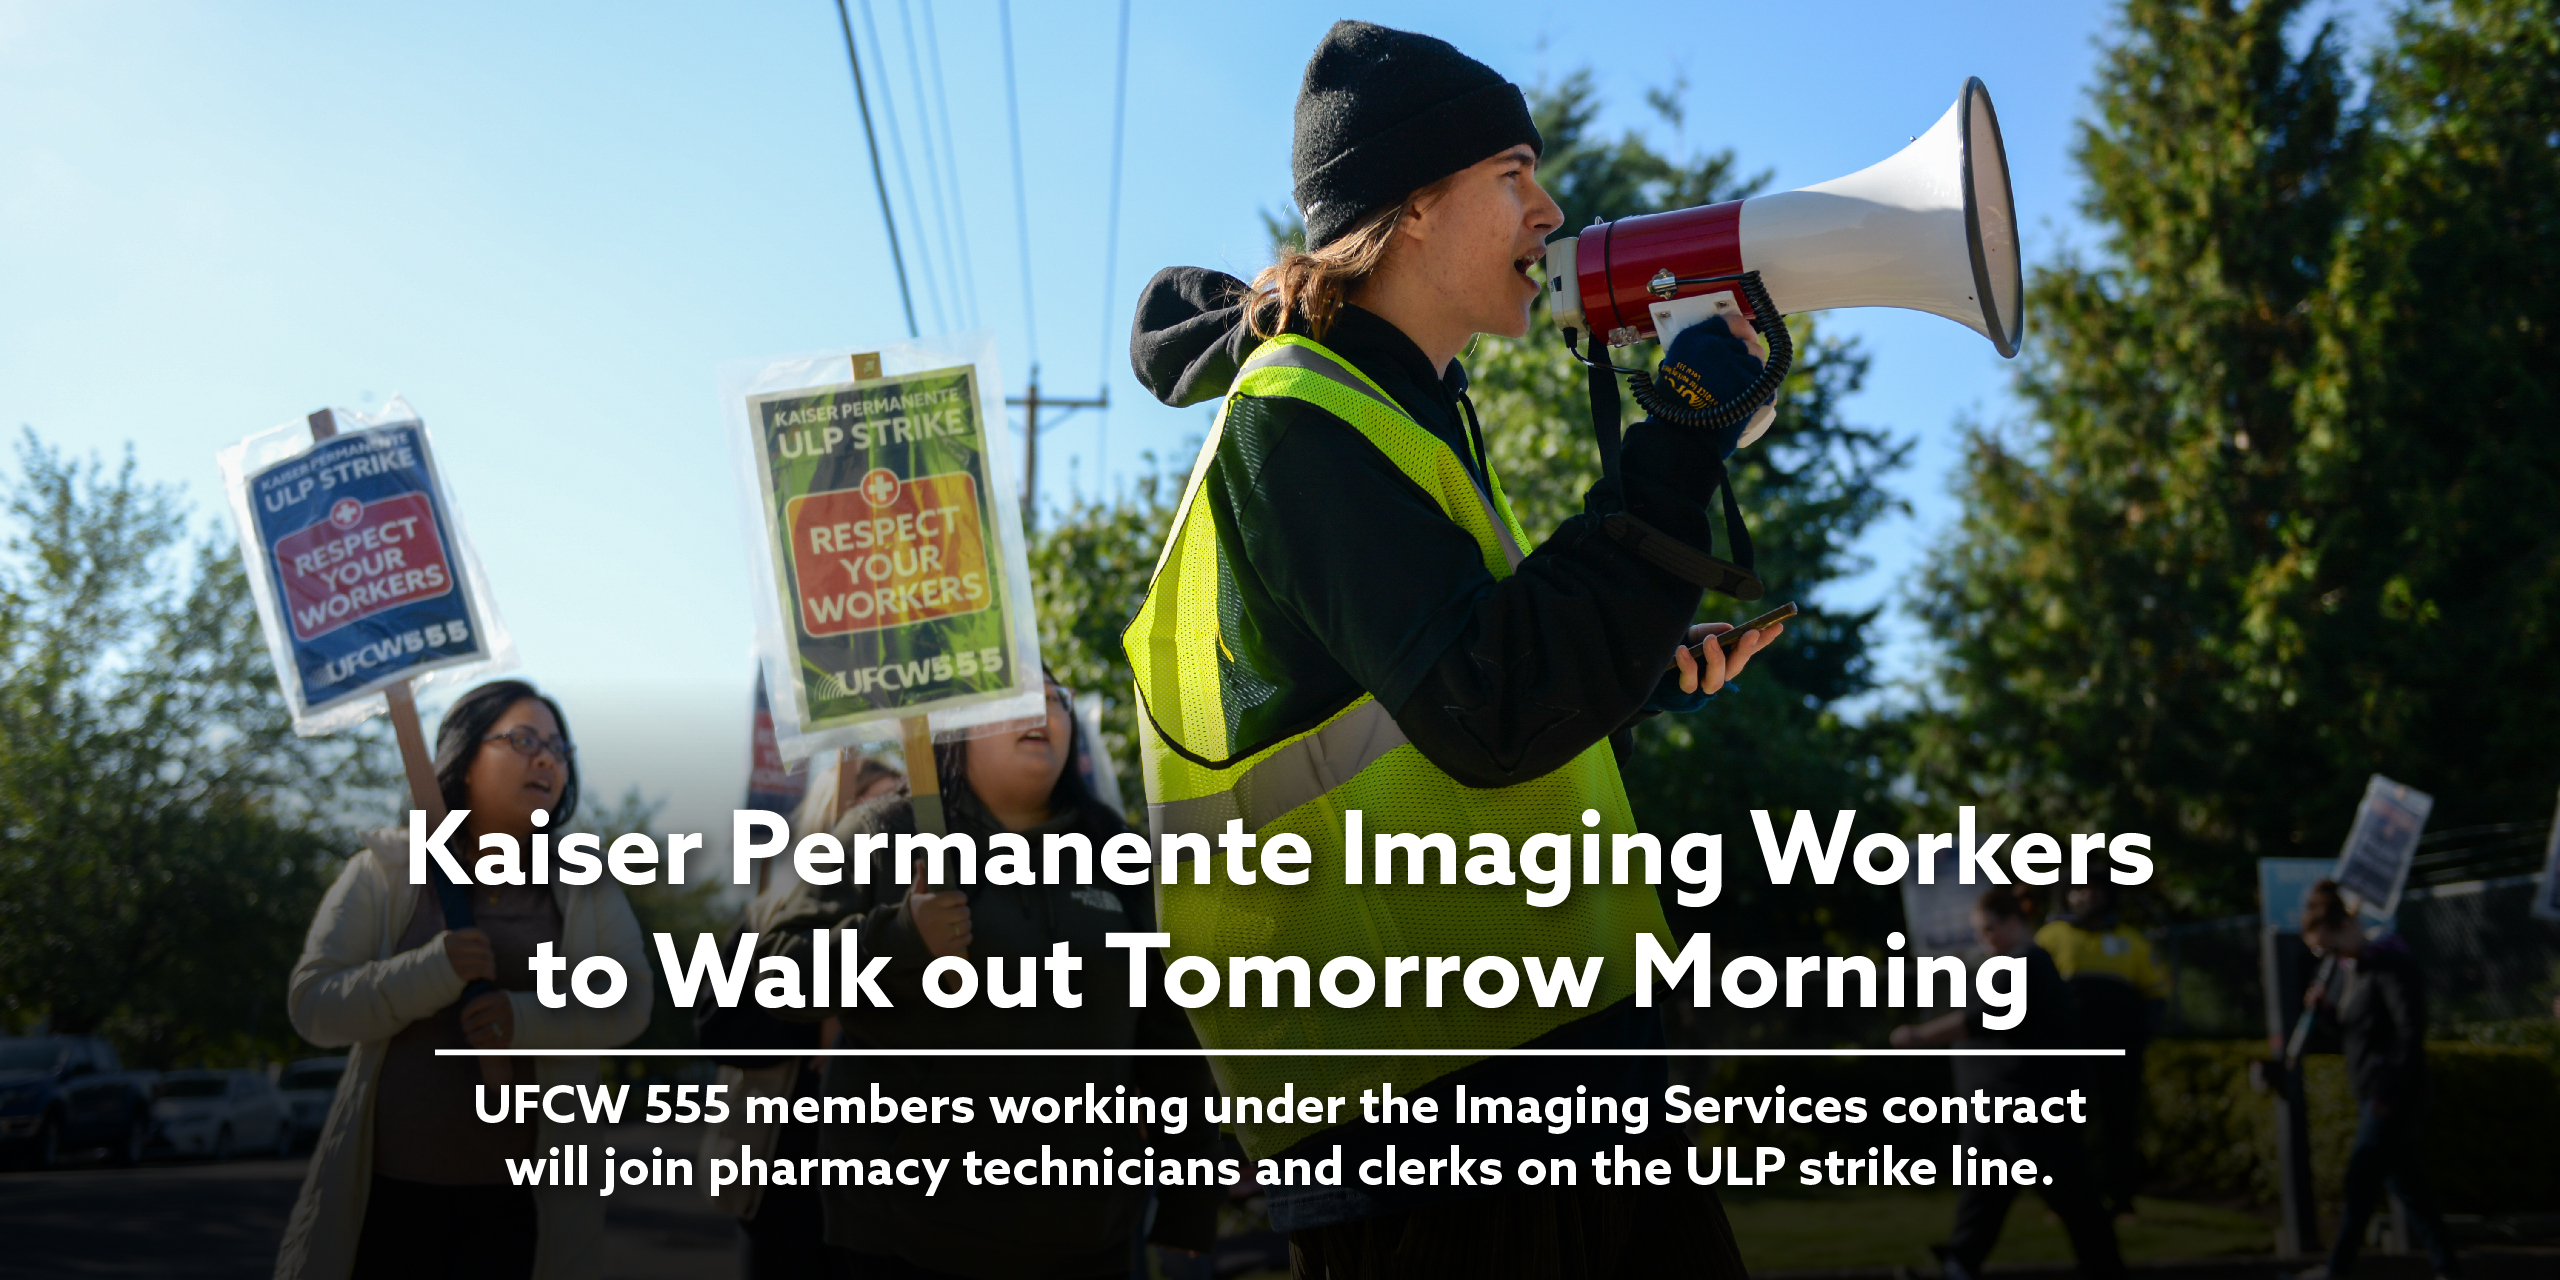 Kaiser Permanente Imaging Workers to Walk out Tomorrow Morning. UFCW 555 members working under the Imaging Services contract will join pharmacy technicians and clerks on the ULP strike line.